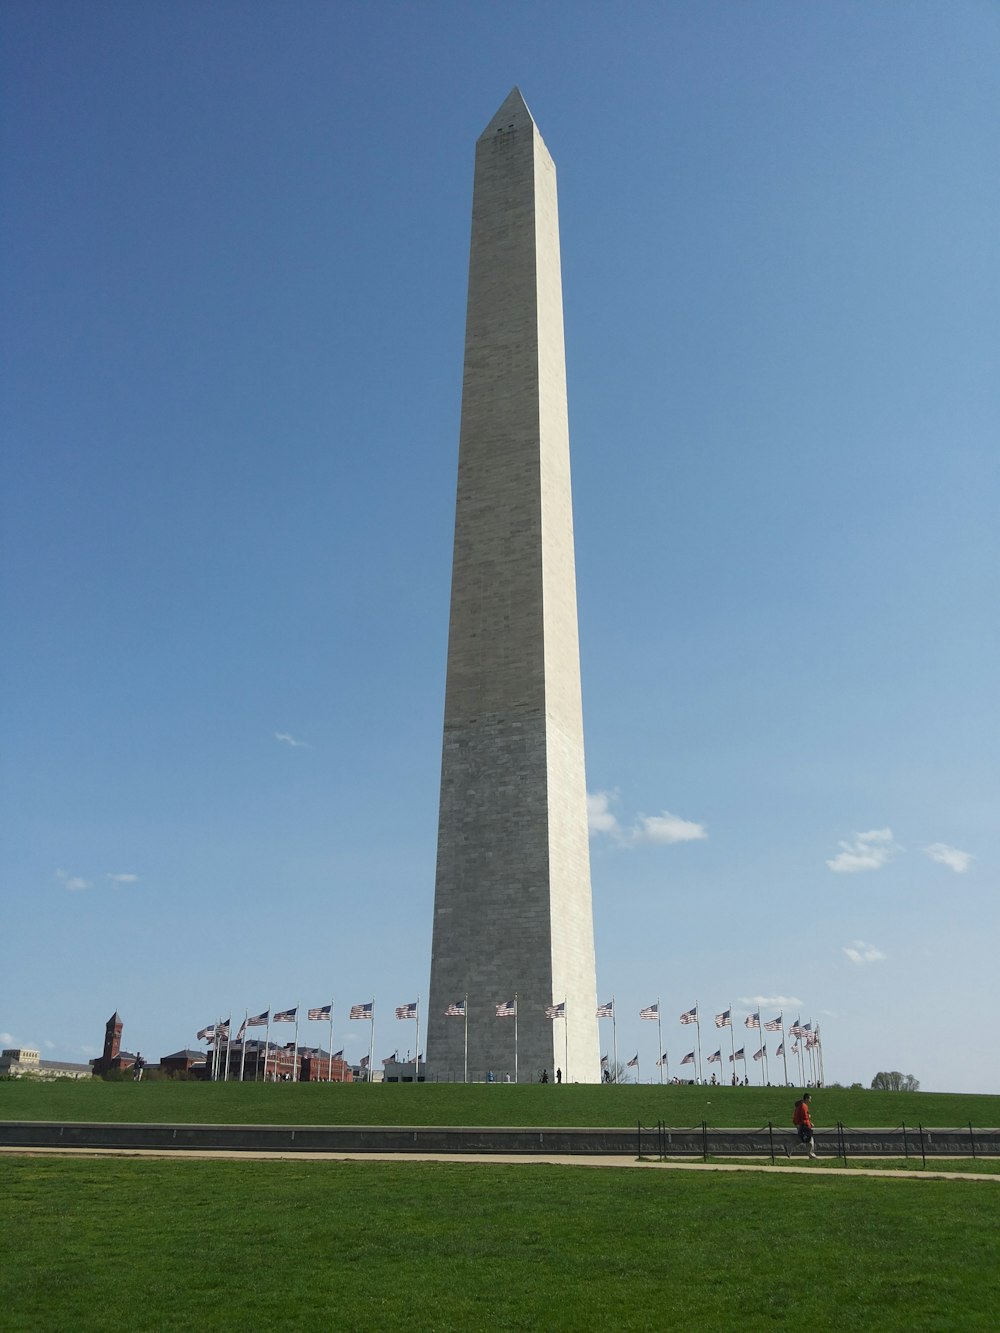 a tall monument with flags in the front with Washington Monument in the background